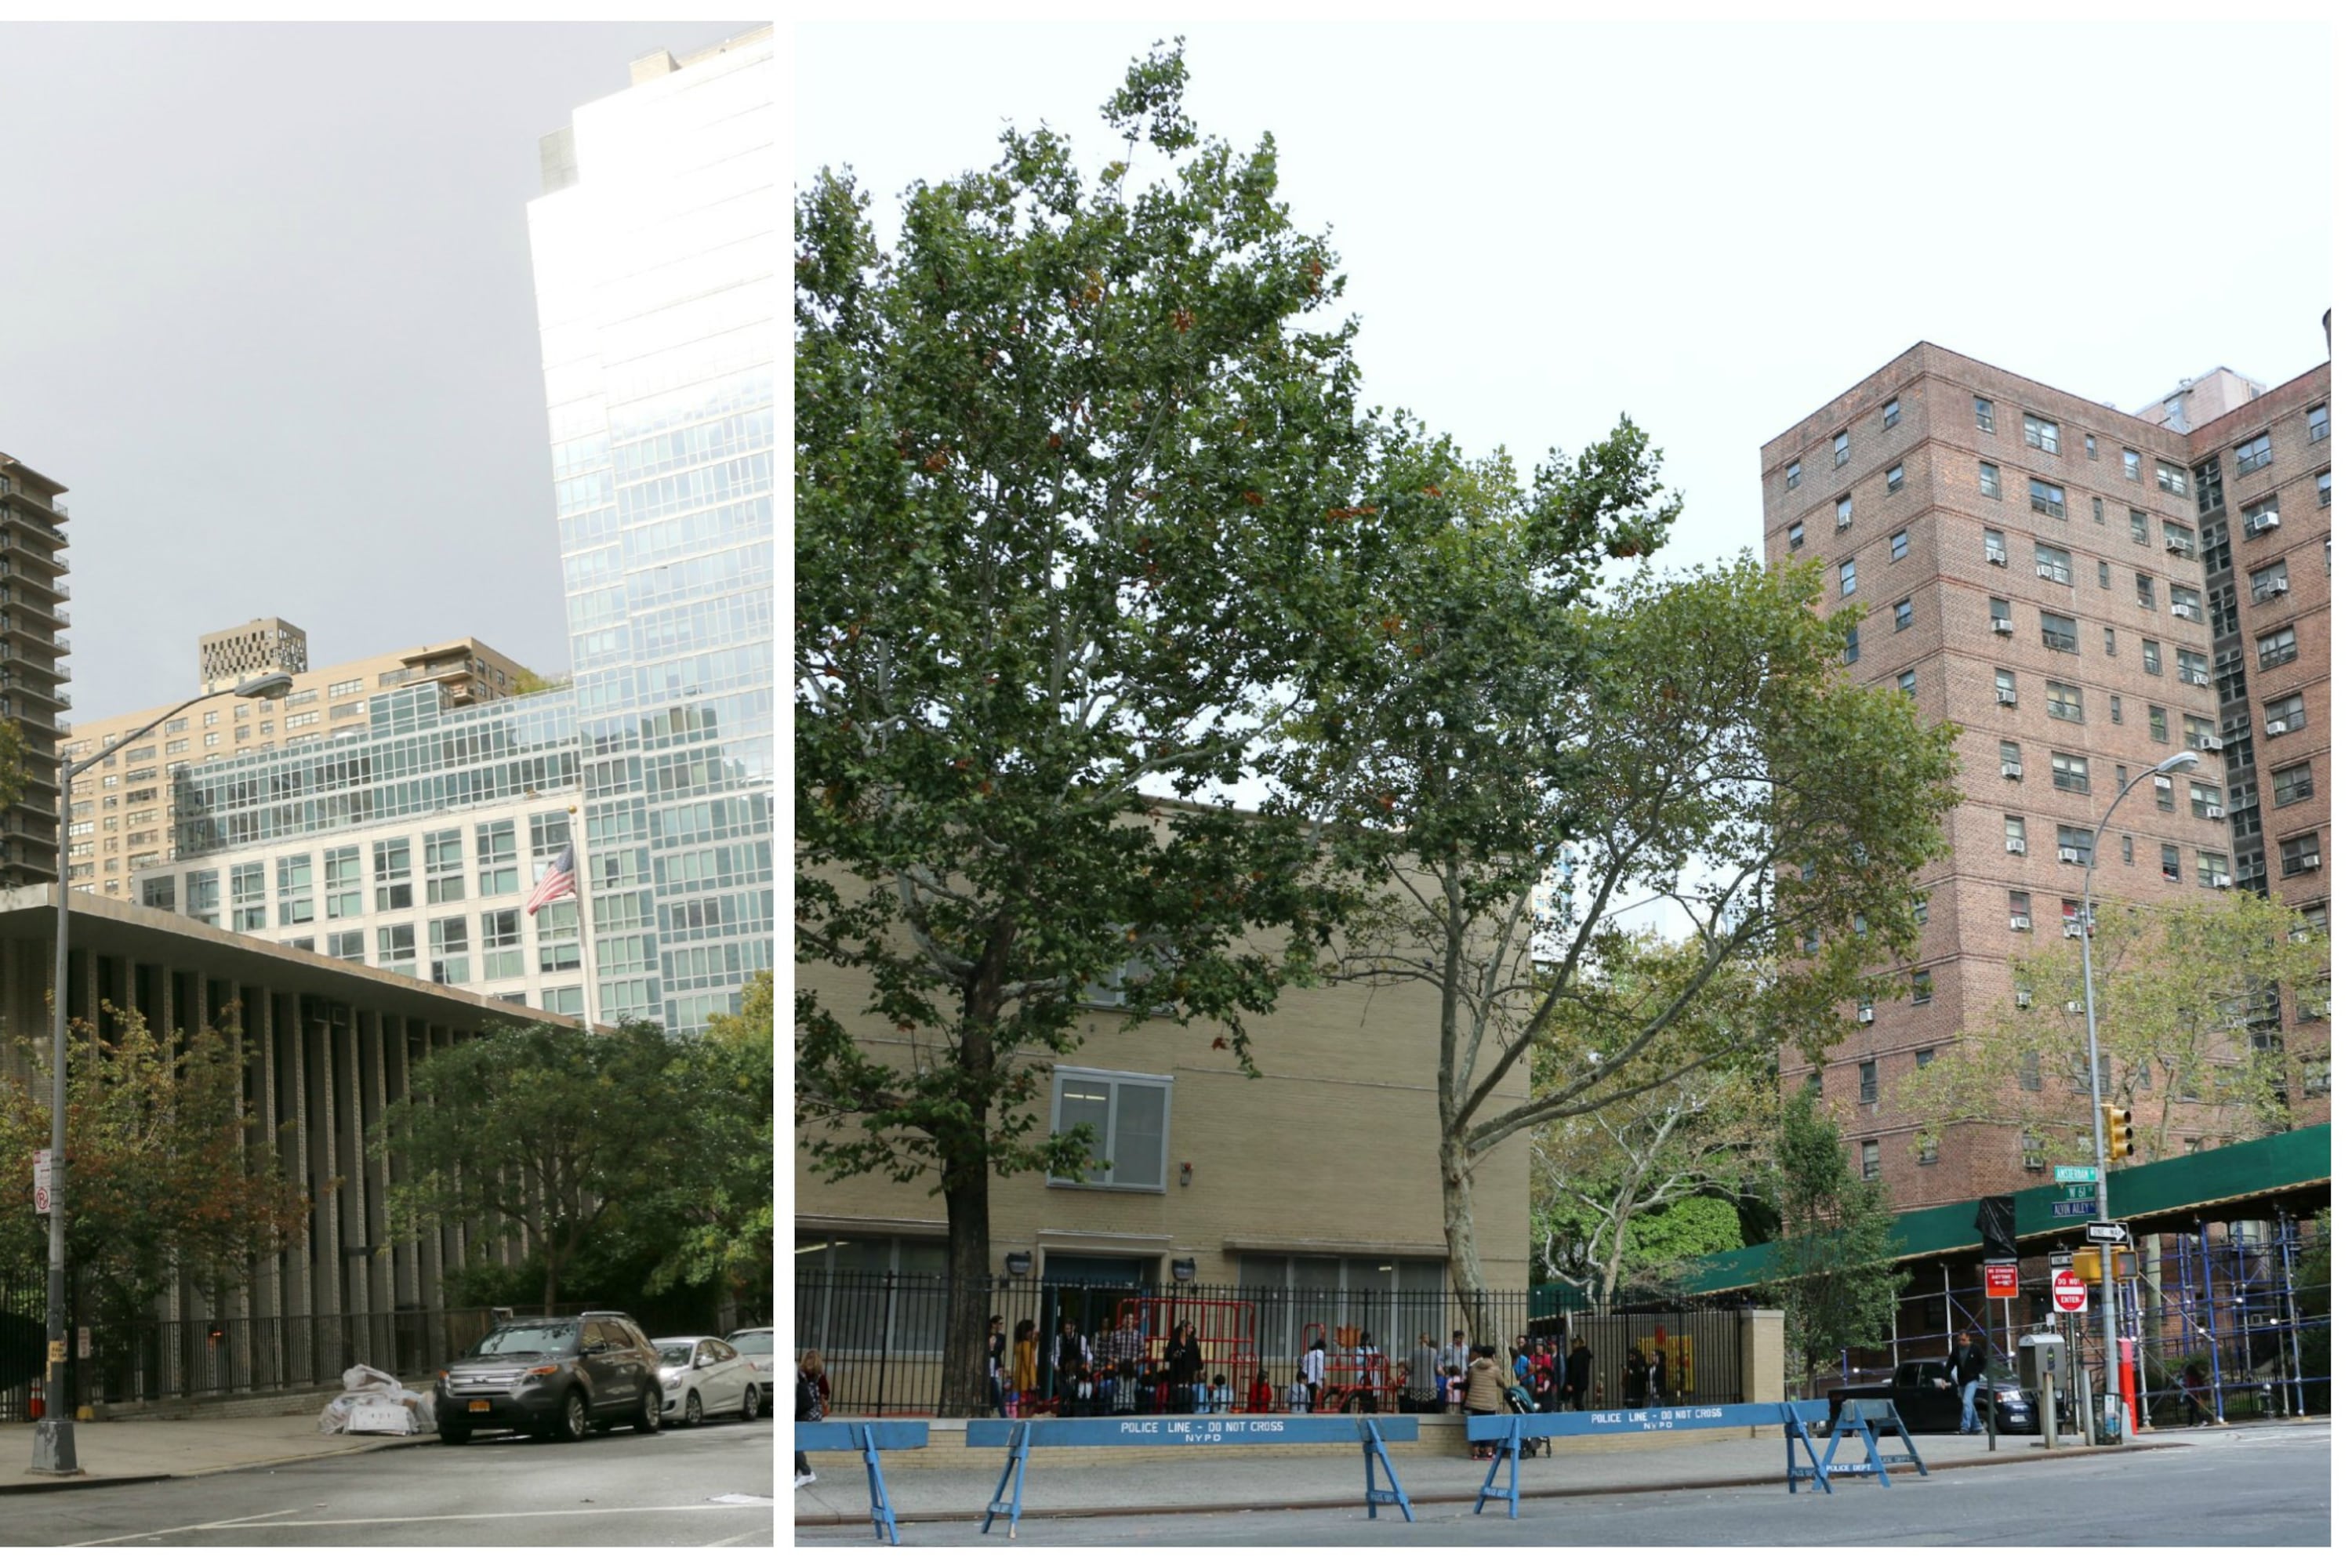 Two schools surrounded by cars and children in Manhattan’s Upper West Side.